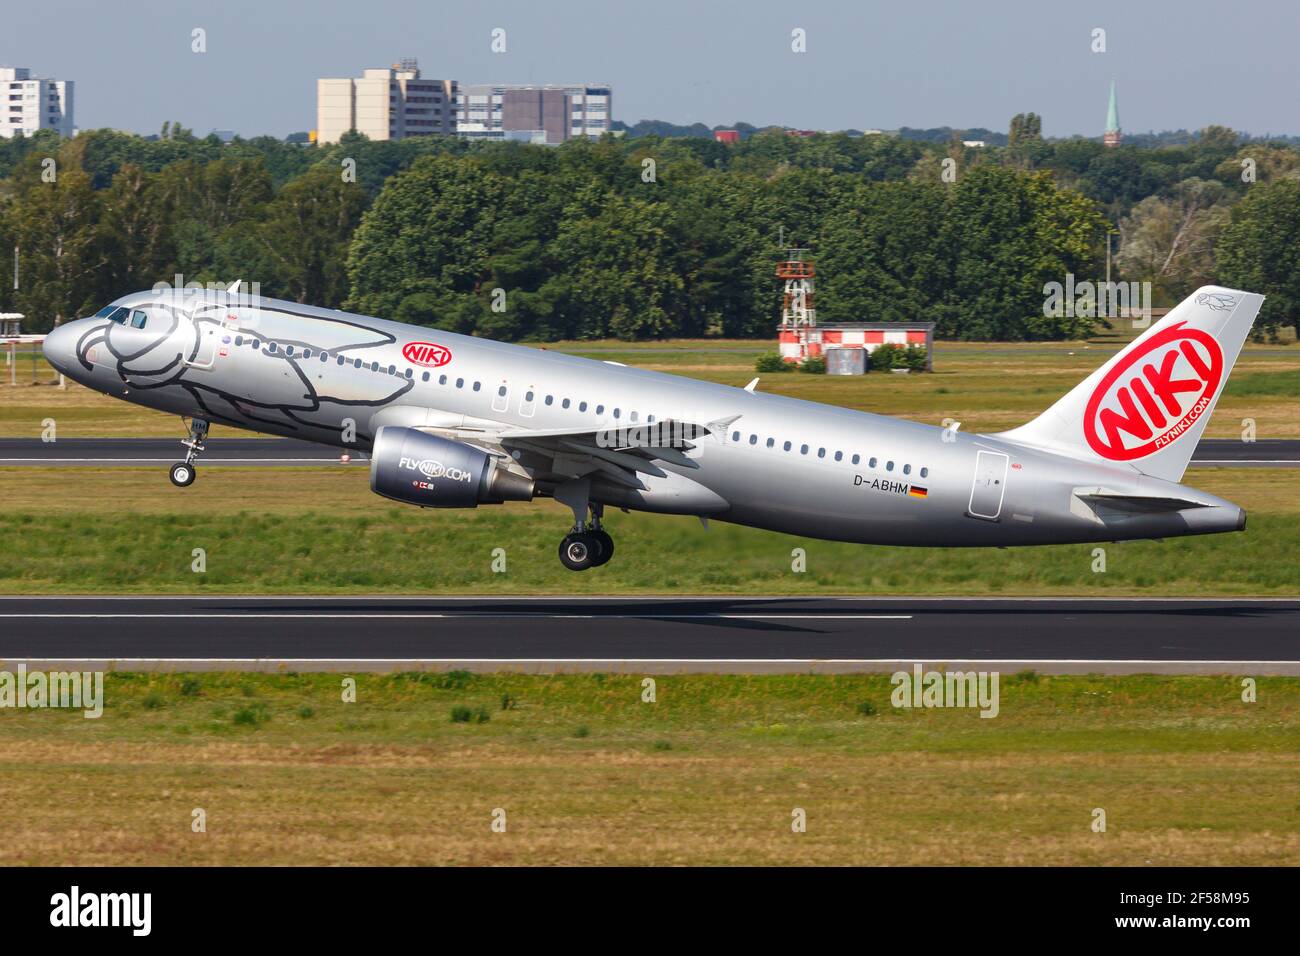 https://c8.alamy.com/comp/2F58M95/berlin-germany-30-august-2017-niki-airbus-a320-at-berlin-tegel-airport-txl-in-germany-airbus-is-an-aircraft-manufacturer-from-toulouse-france-2F58M95.jpg